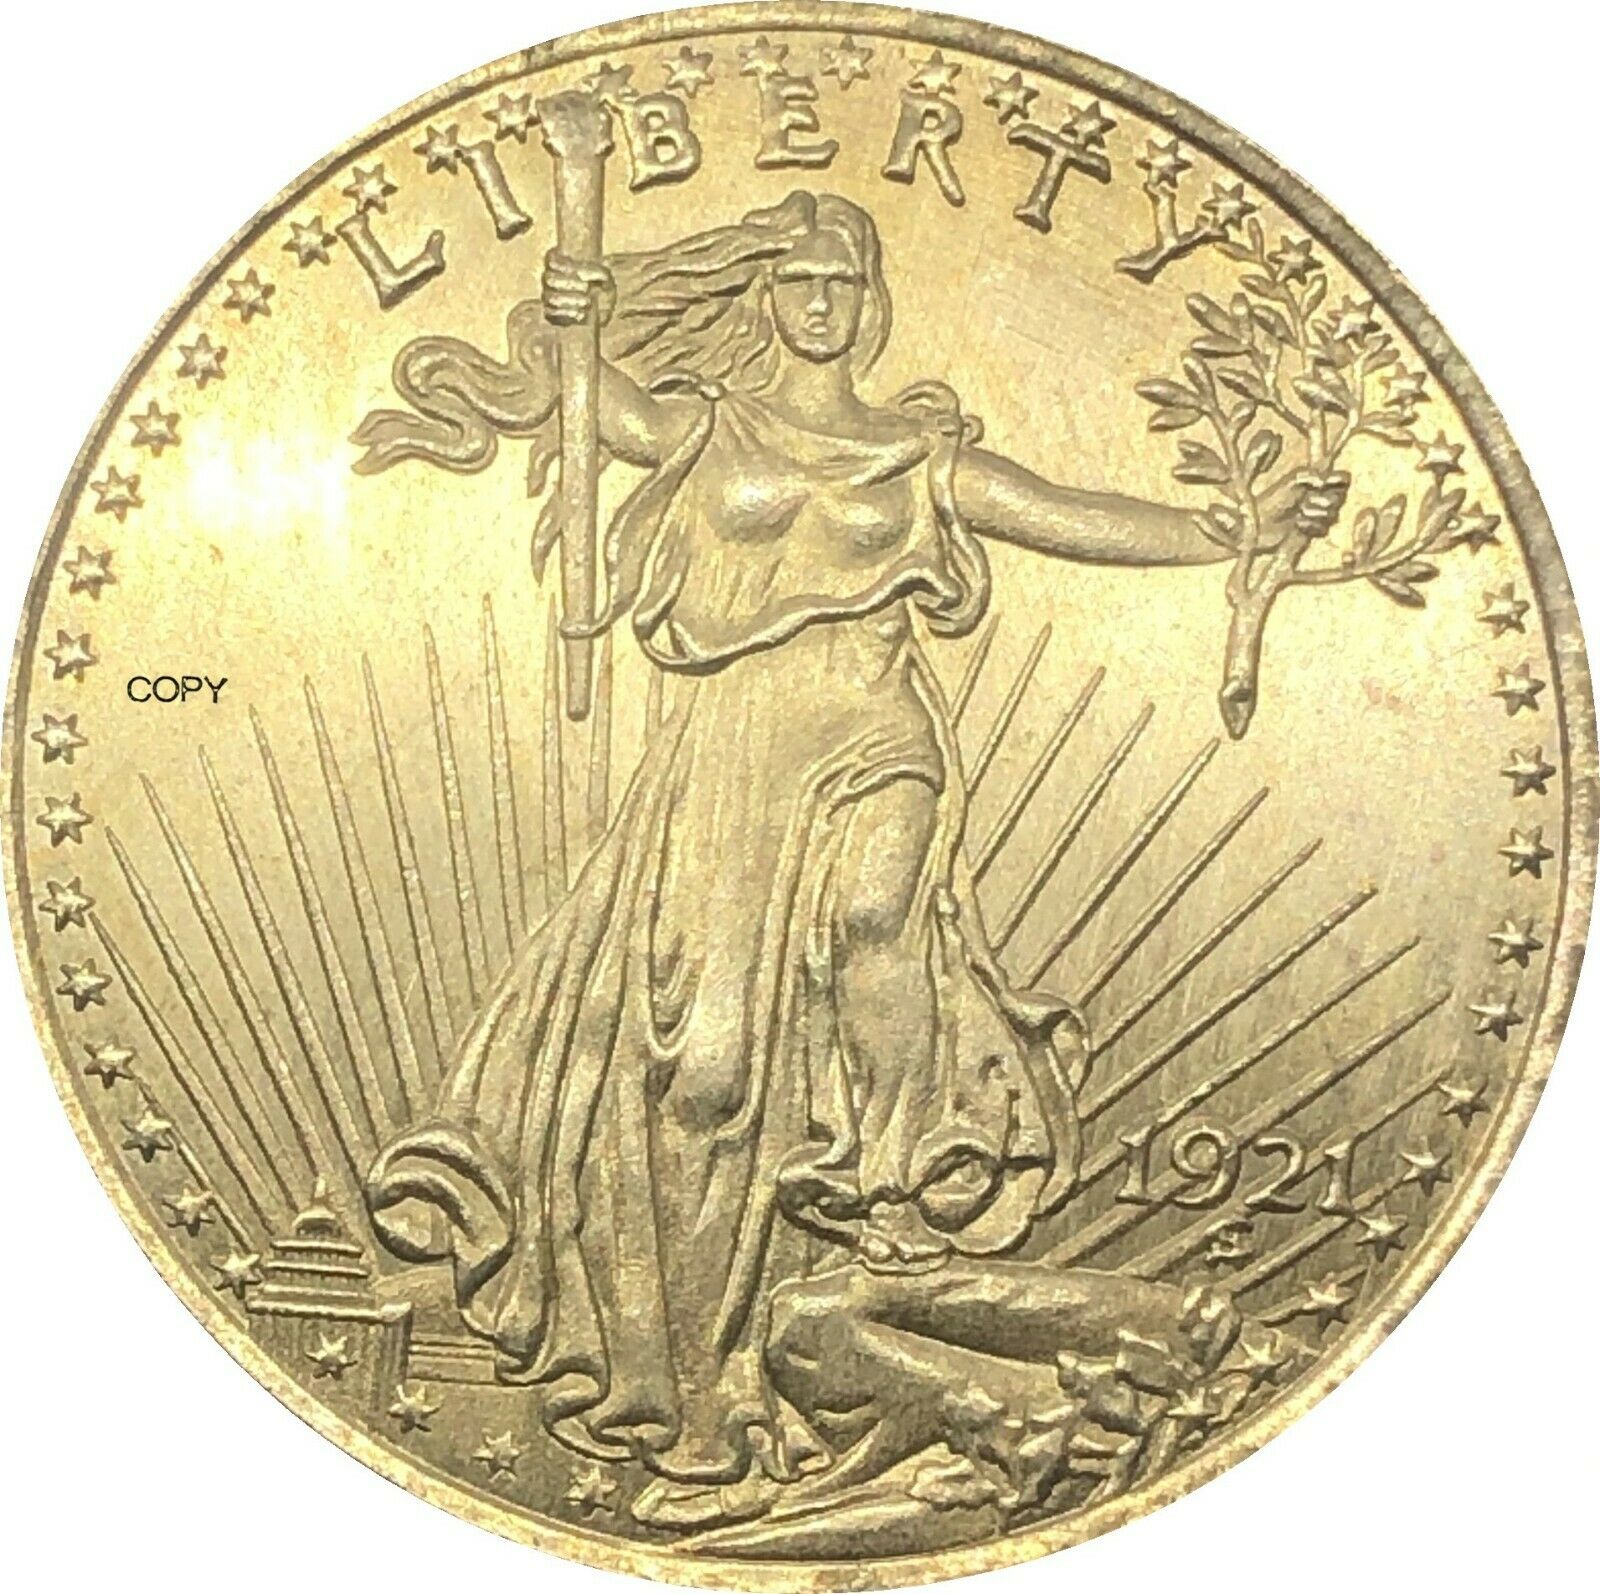 Statue Of Liberty 20 Dollars Gold Copy Old Coin 1921 With Motto In God We Trust